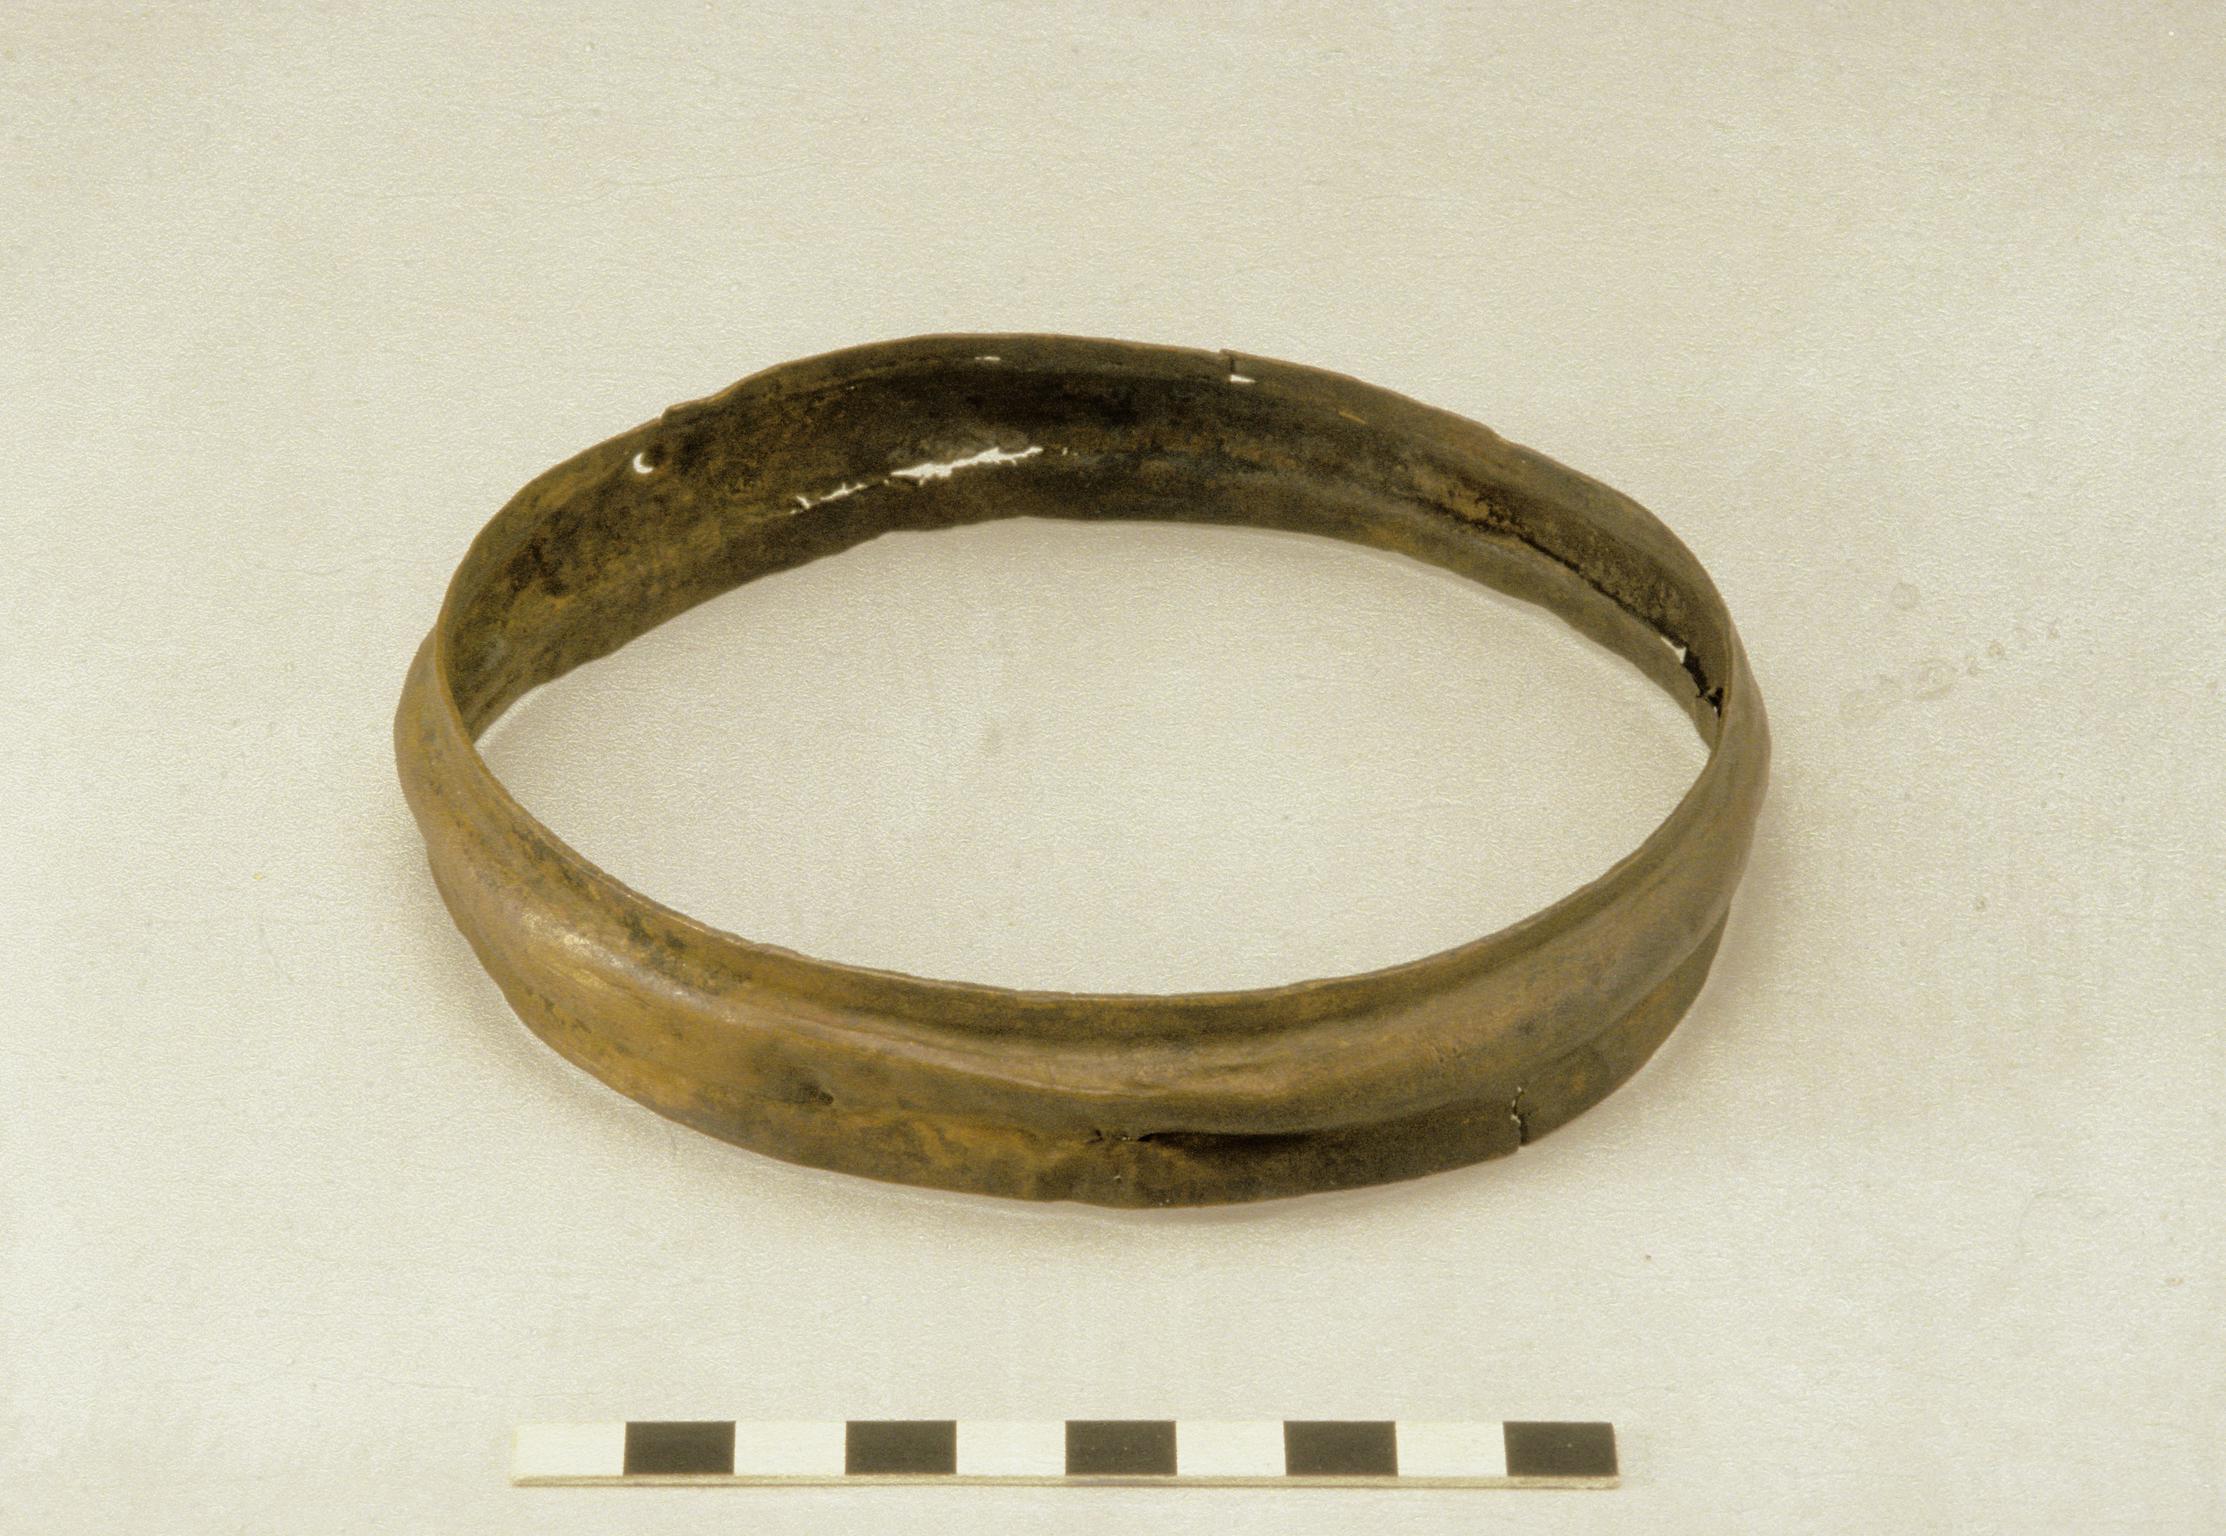 Late Iron Age copper alloy nave hoop